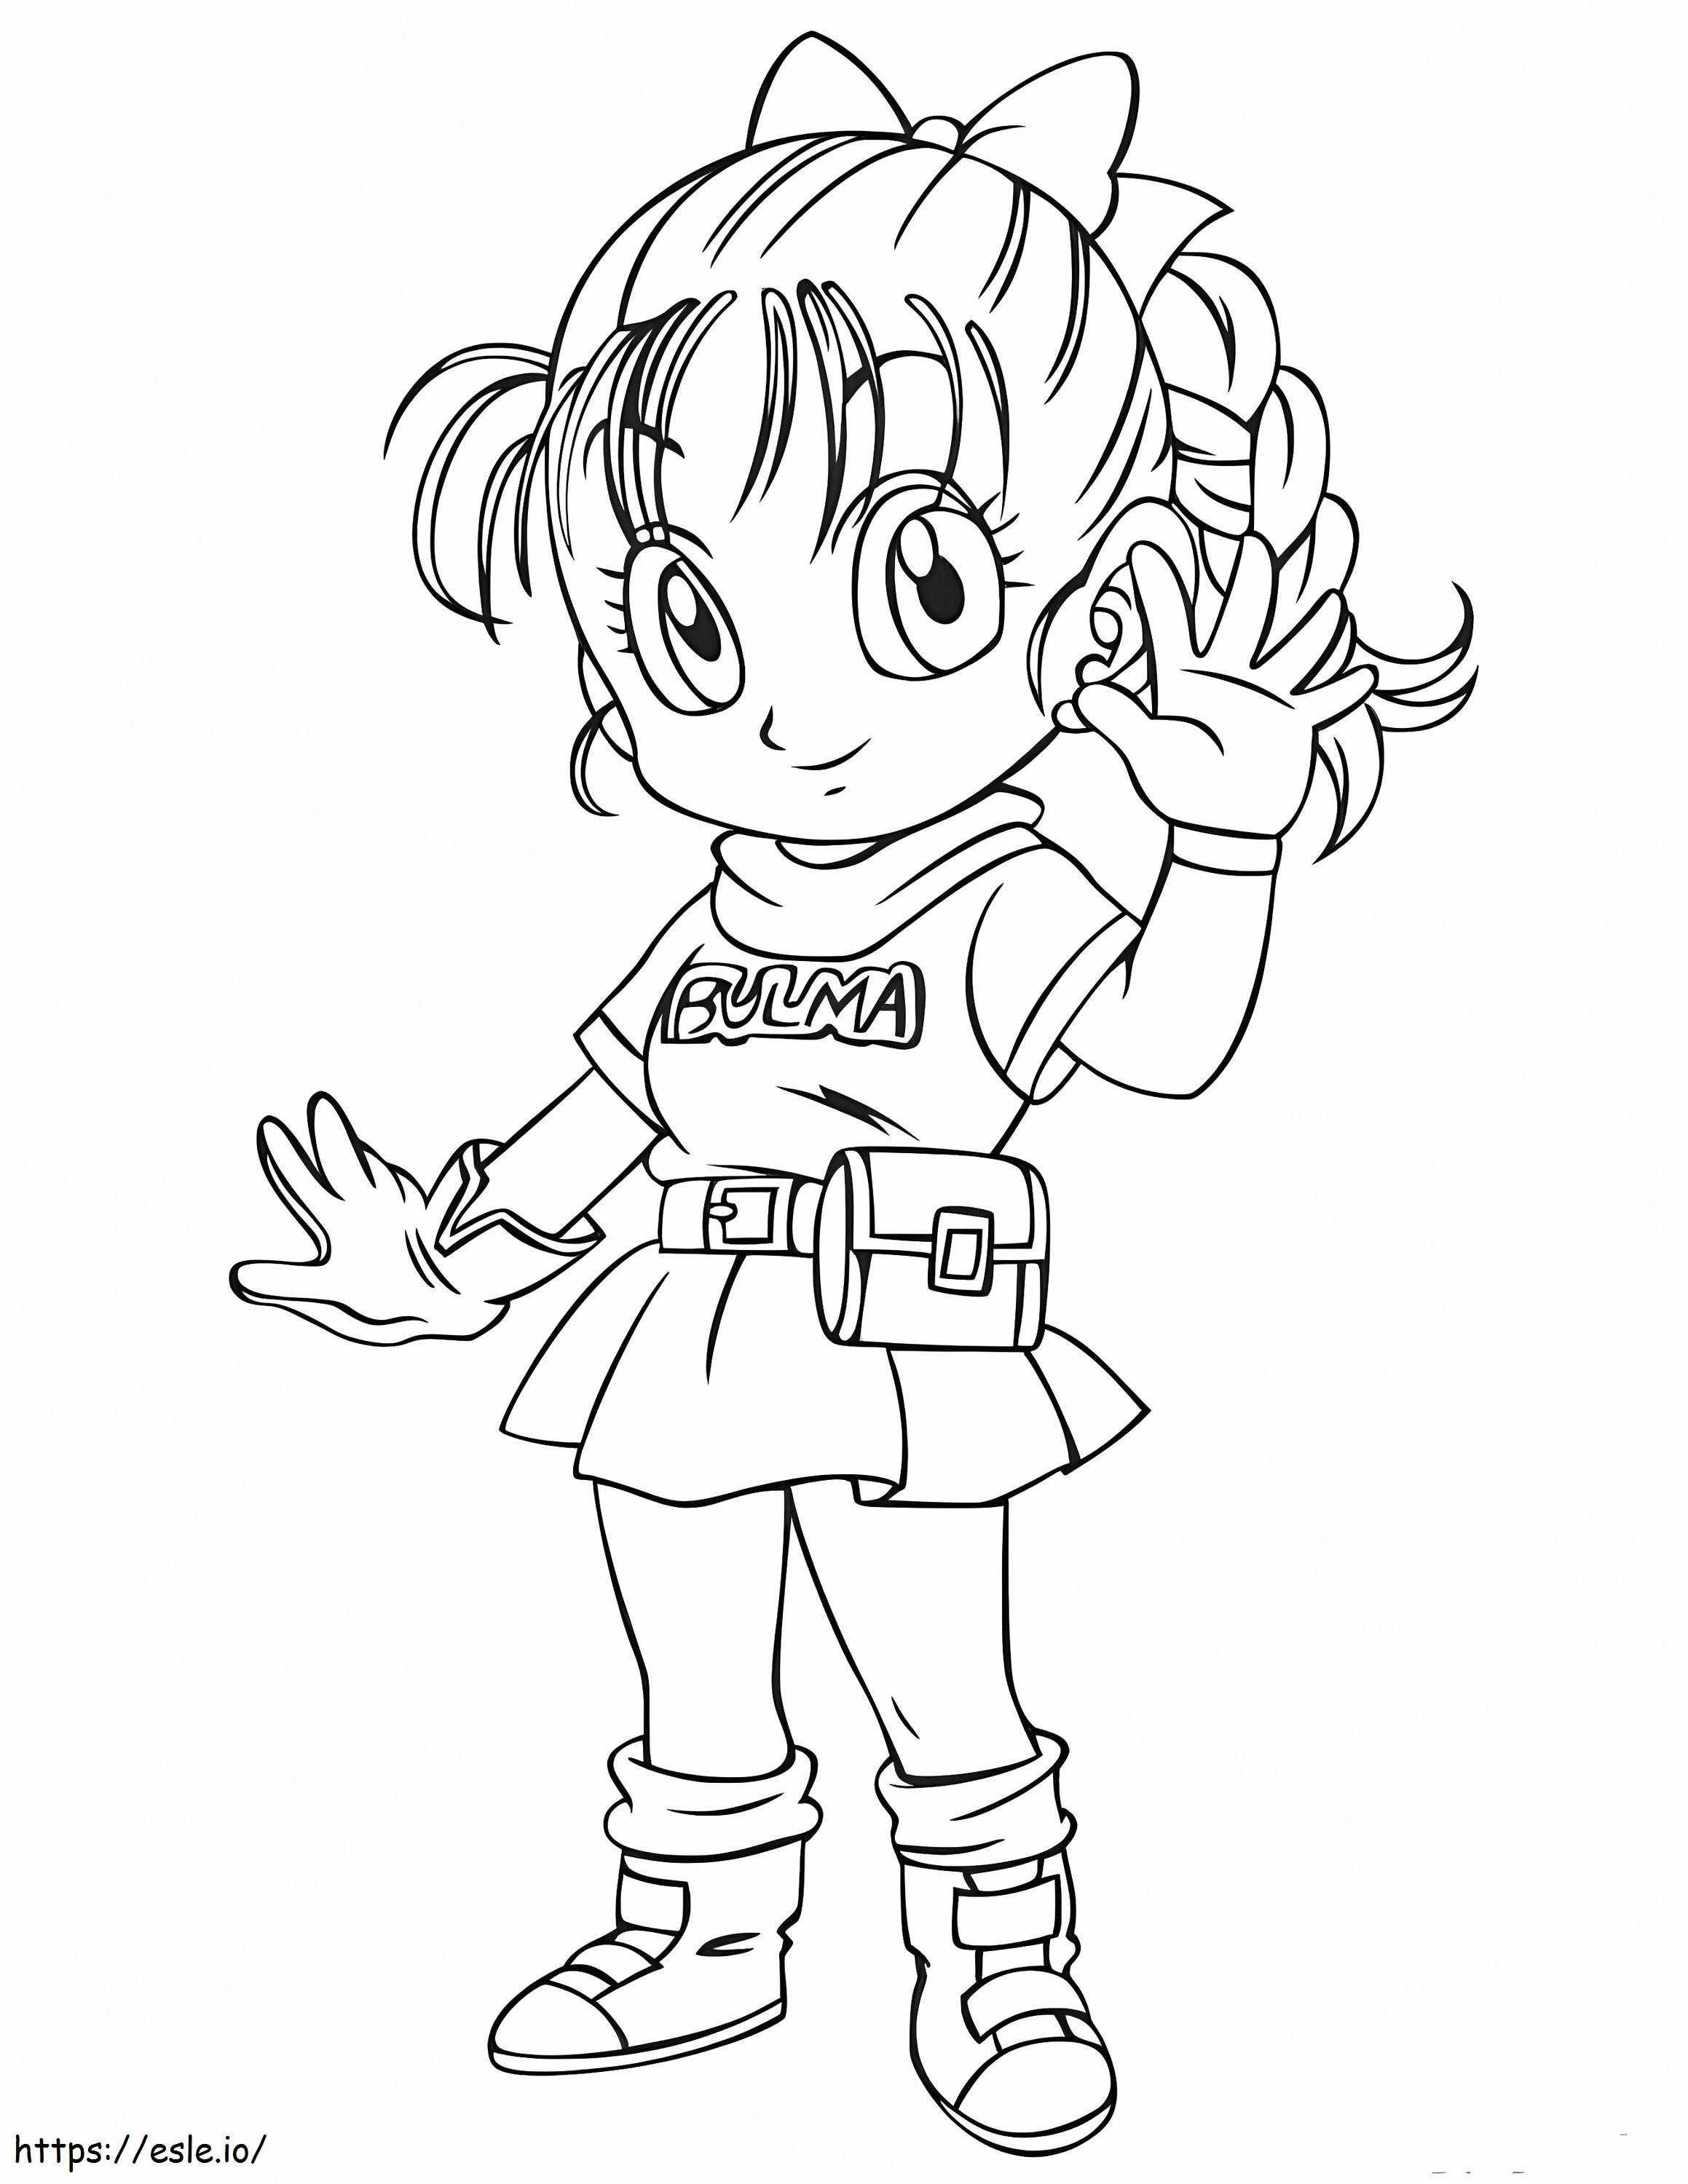 Little Bulma Smiling coloring page